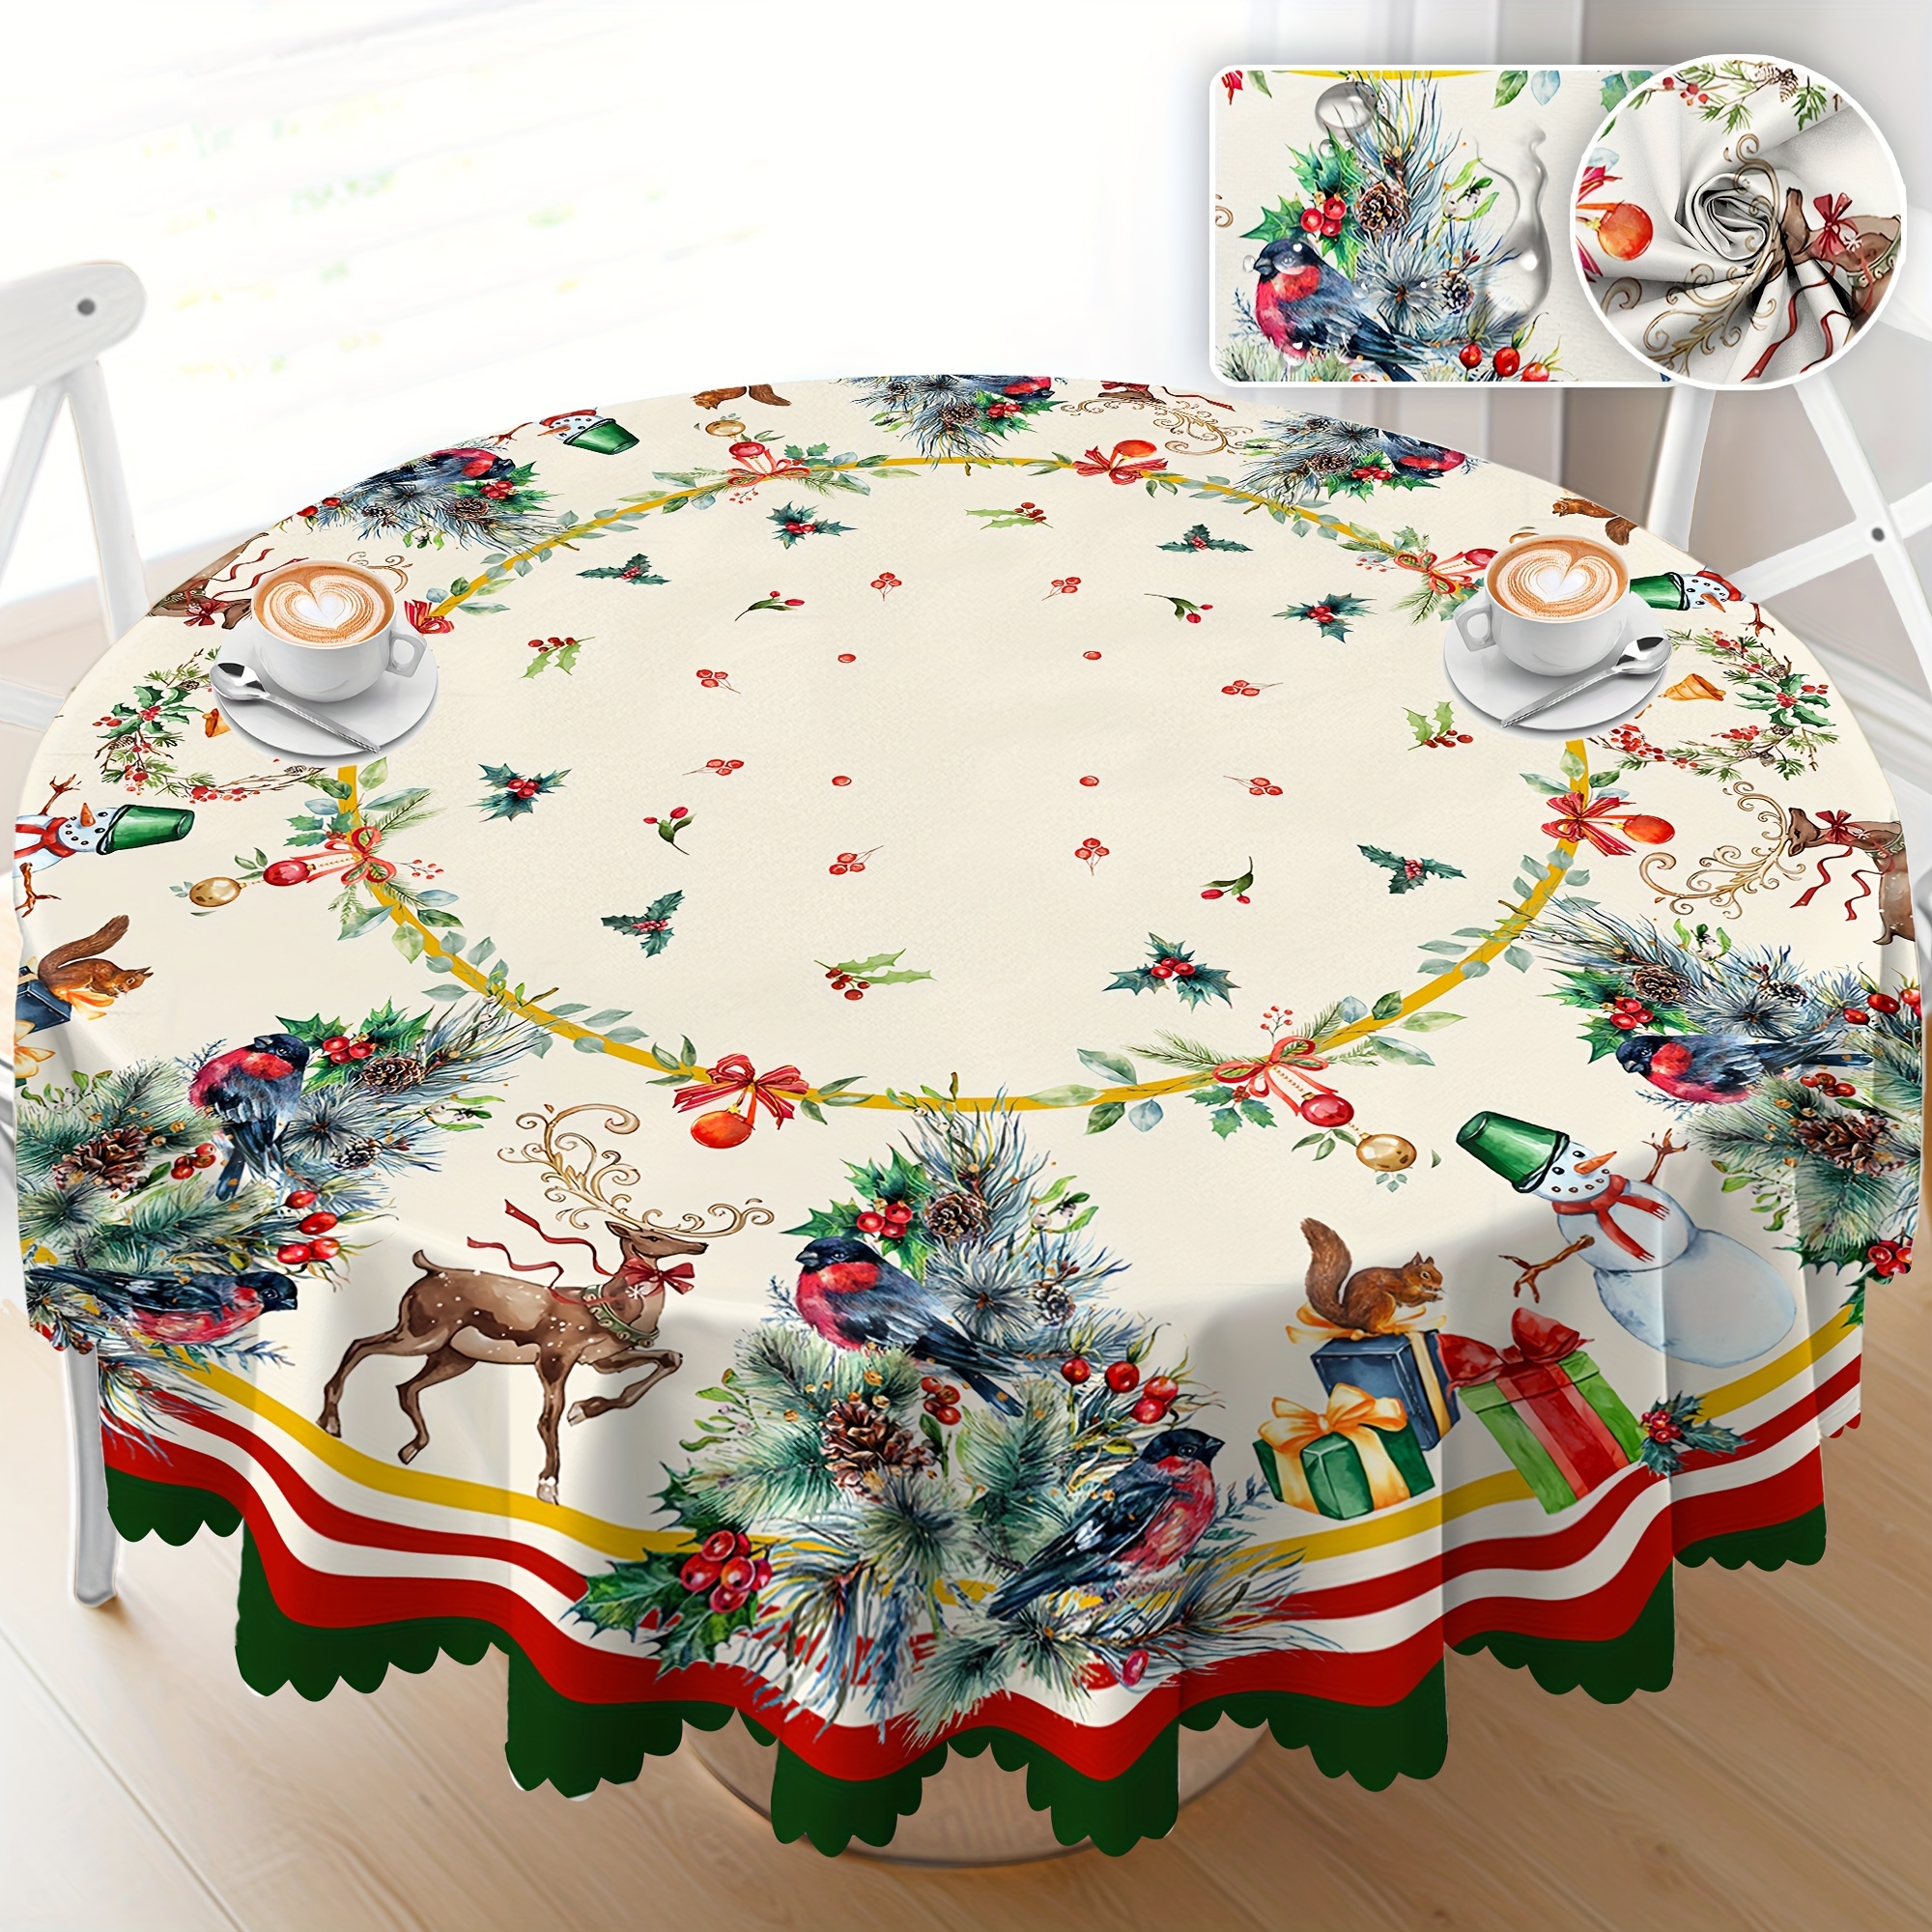 

1pc Premium Polyester Christmas Tablecloth - Vibrant Pine Tree, Butterflies & Snowman Pattern - Festive Table Decor For Holidays, Home Atmosphere Enhancer & Perfect Gift Idea